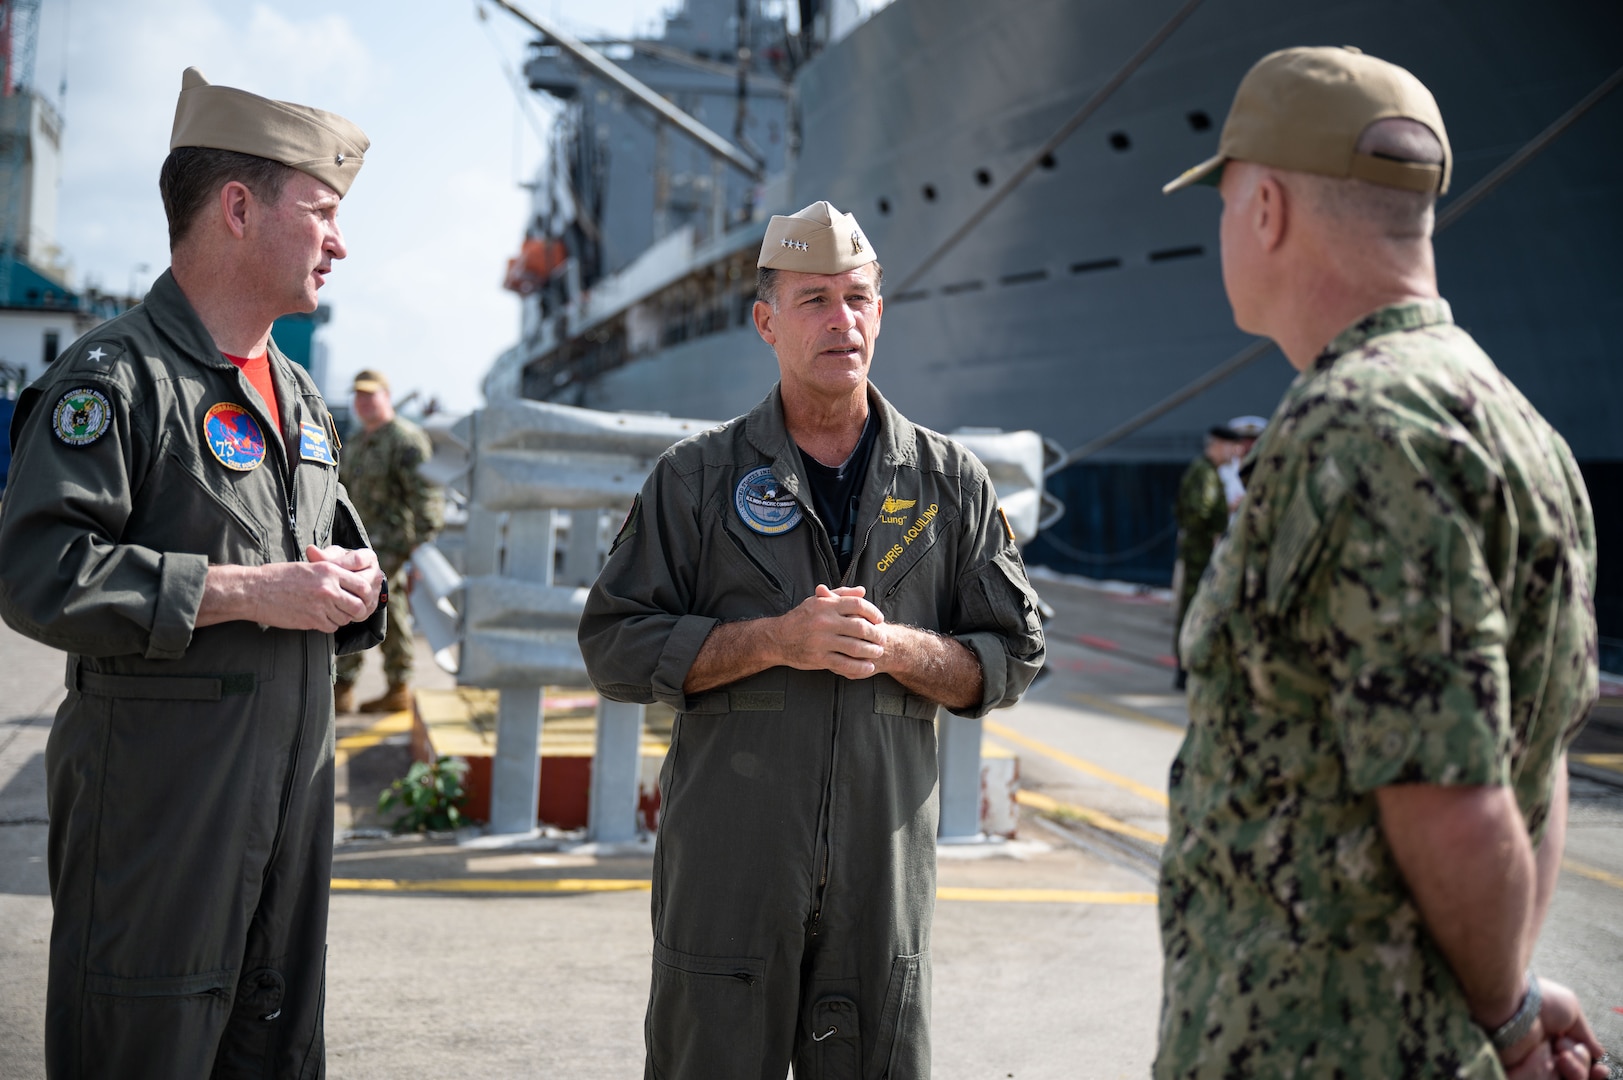 SINGAPORE (March 16, 2023) Rear Adm. Mark Melson, Commander, Logistics Group Western Pacific/ Task Force 73 (COMLOG WESTPAC/ CTF 73), left, gives a brief to Adm. John C. Aquilino, Commander U.S. Indo-Pacific Command, center, during an overseas trip to Singapore. COMLOG WESTPAC supports deployed surface units and aircraft carriers, along with regional Allies and partners, to facilitate patrols in the South China Sea, participation in naval exercises and responses to natural disasters. USINDOPACOM is committed to enhancing stability in the Asia-Pacific region by promoting security cooperation, encouraging peaceful development, responding to contingencies, deterring aggression and, when necessary, fighting to win. (U.S. Navy photo by Chief Mass Communication Specialist Shannon M. Smith)